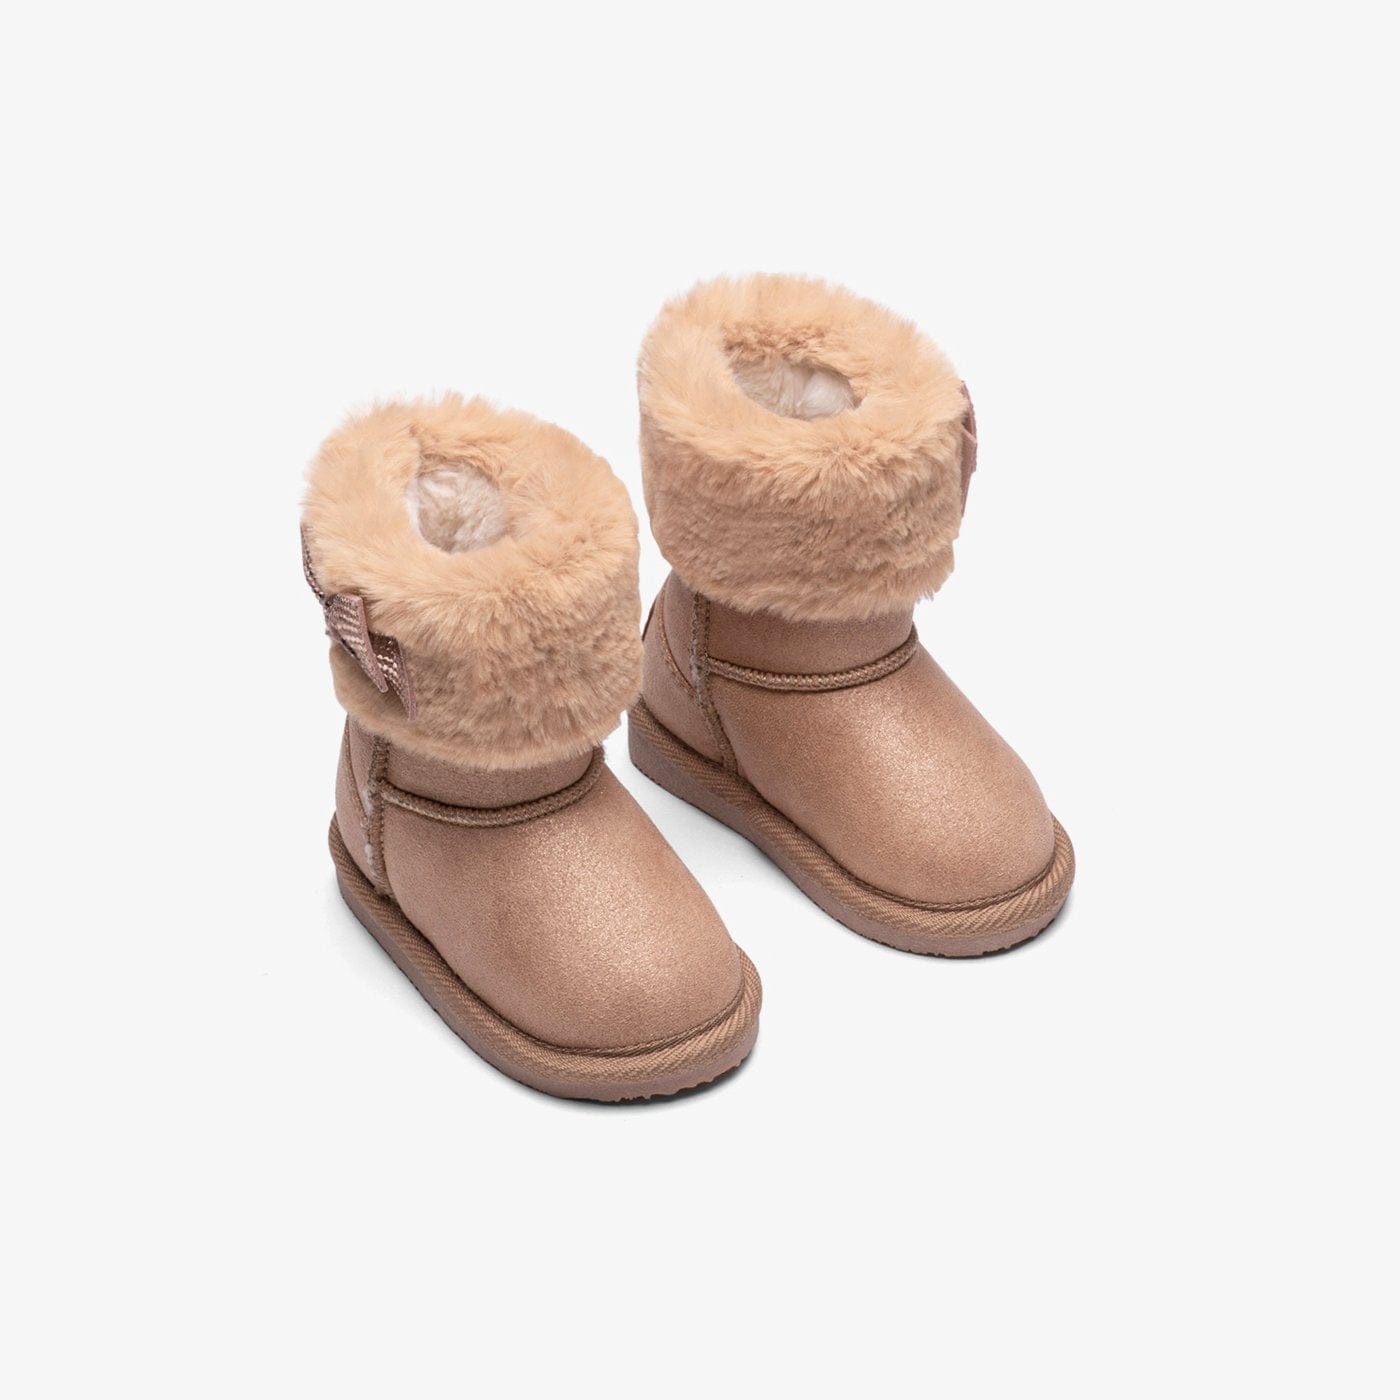 OSITO Shoes Baby's Magnesium Fur Australian Boots